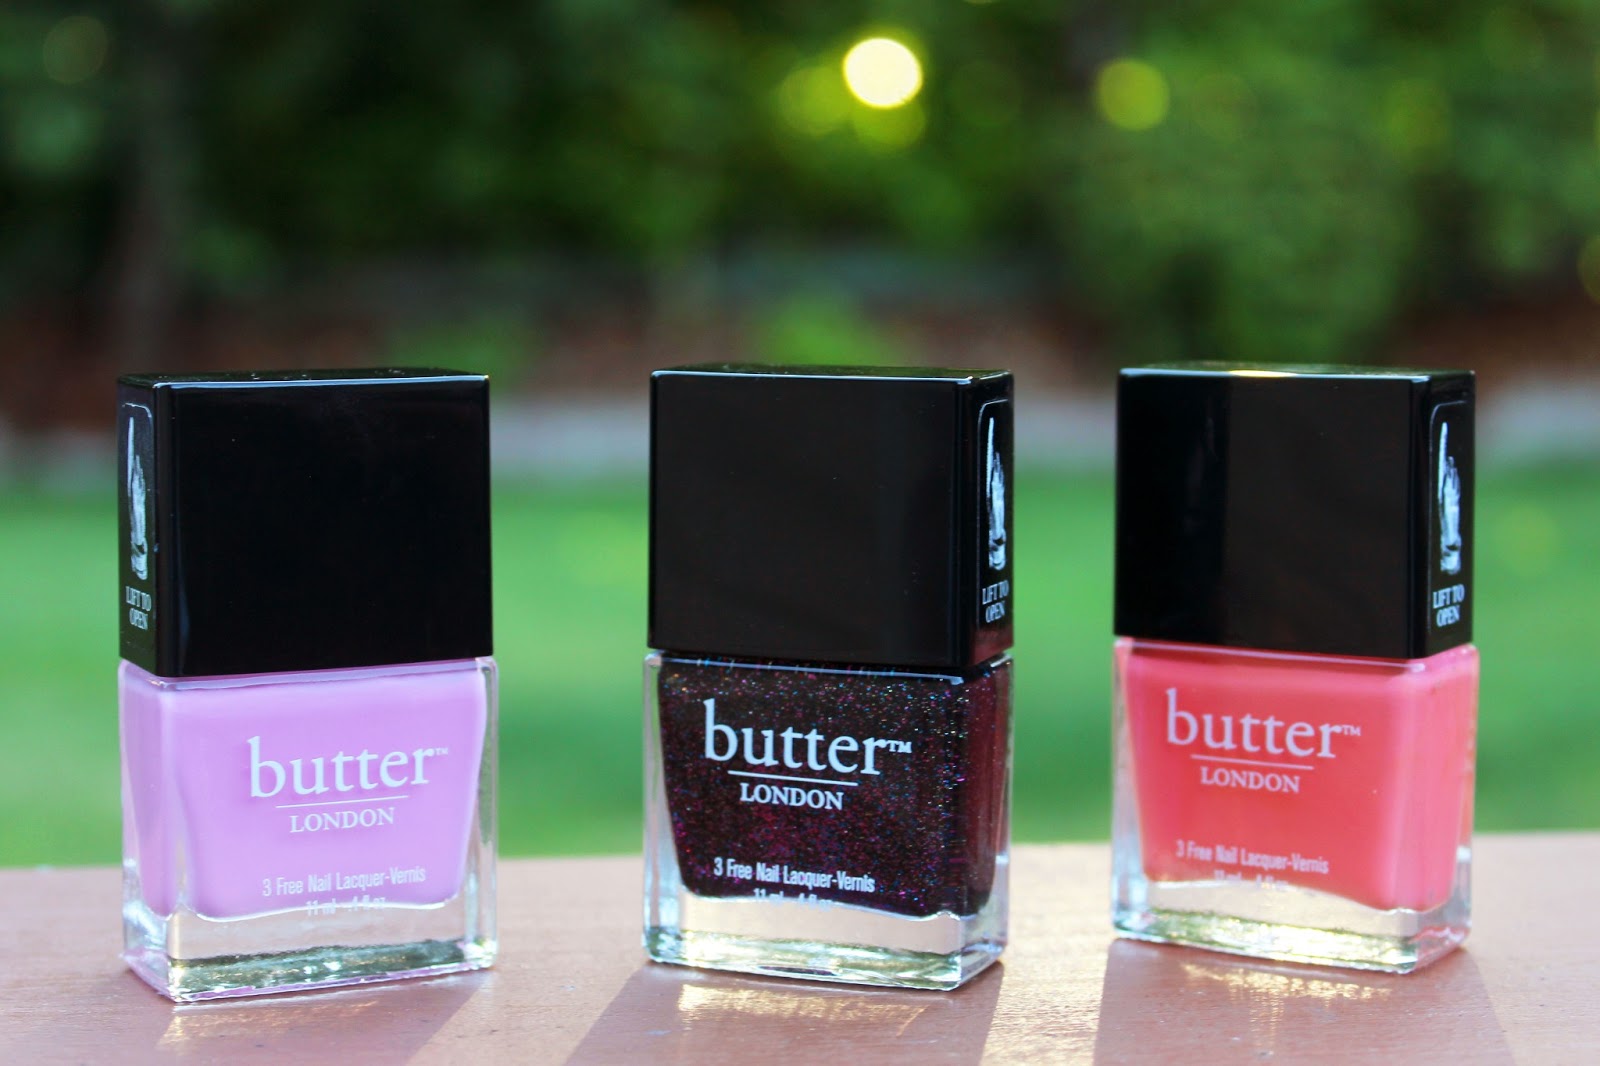 9. "Short and Sweetie" by Butter London - wide 3